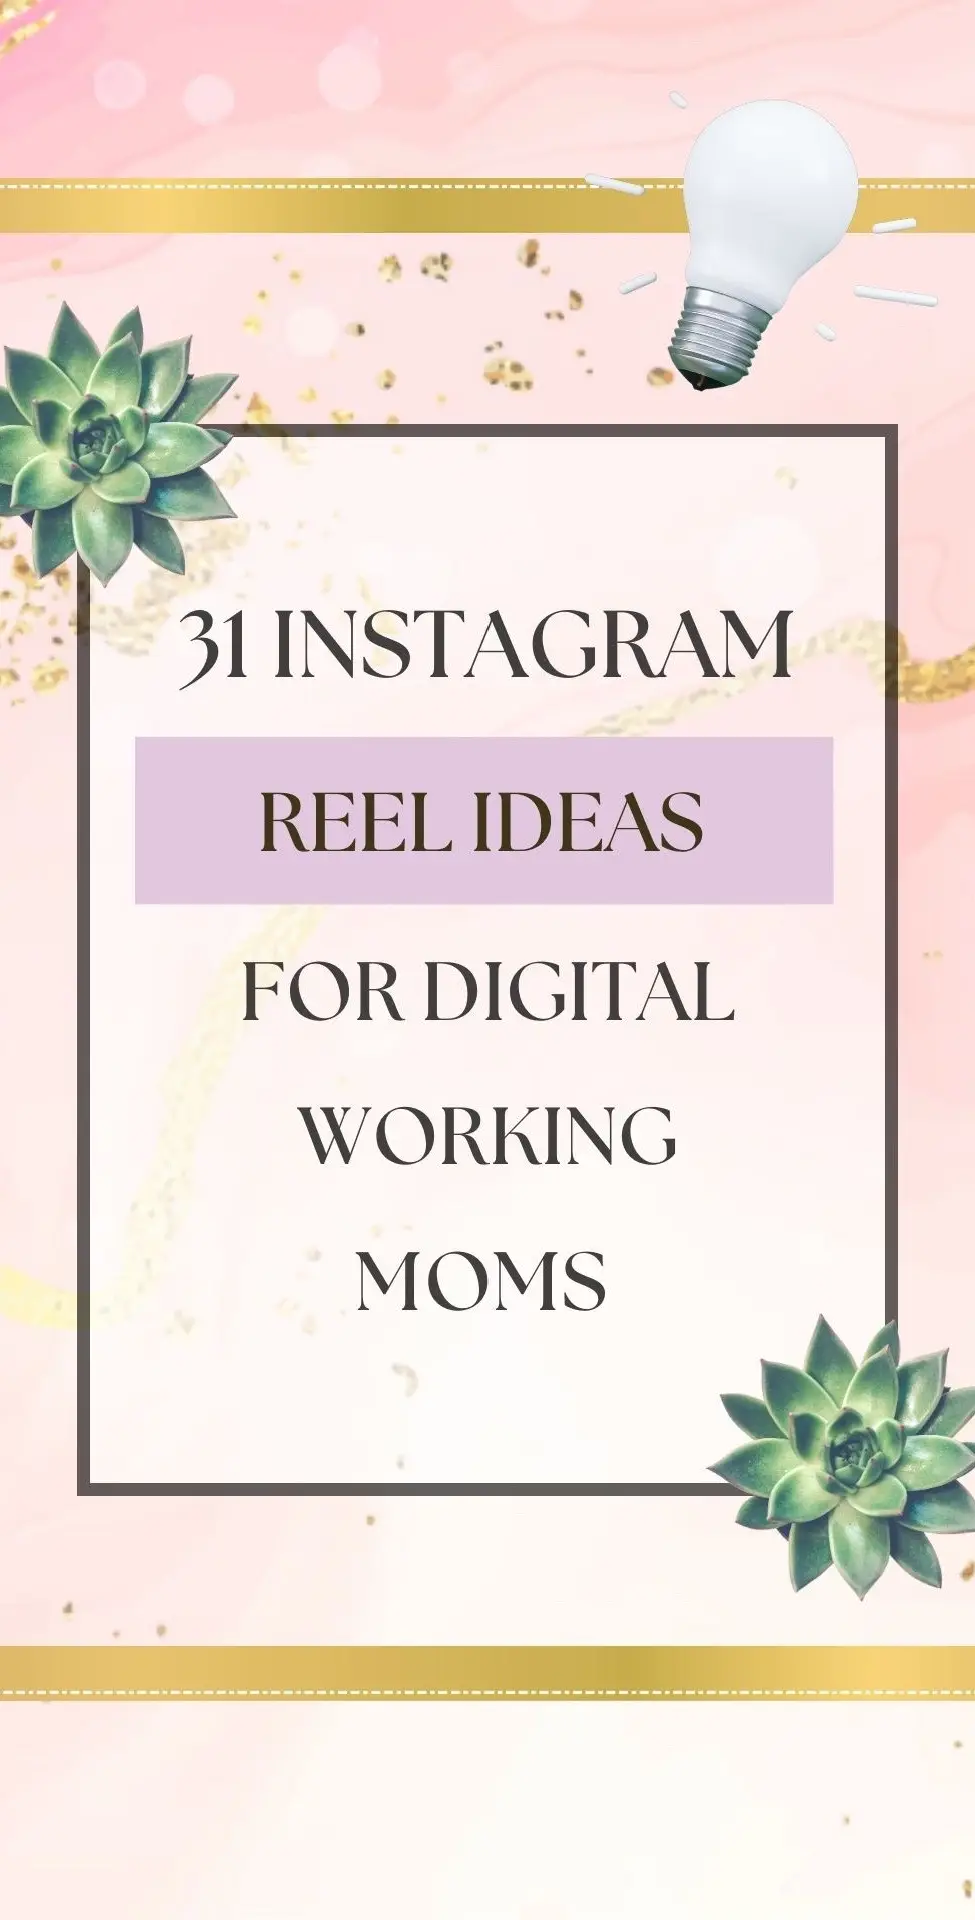 Here they are 👇🏻
 
 21. How to Stay Focused with Kids at Home
 22. Creative Content Ideas for Mompreneurs
 23. Managing Mom Guilt: Tips & Strategies
 24. Mom’s Guide to Outsourcing Tasks
 25. Setting Boundaries for Work-Life Balance
 26. Tech Tools to Simplify Mom’s Life
 27. 5-Minute Self-Care Rituals for Busy Moms
 28. Organizing Family & Work Calendars
 29. Motivational Stories of Mompreneurs
 30. Decluttering Tips for Mom’s Work Space
 31. Celebrating Mom Wins: Small Victories Matter
 
 And there it is!
 
 Keep in mind, your content doesn't have to solely focus on LEPO MAX or DWA or that 7$ course with LM…
 
 Share your distinct narrative, your victories, your methods, and your everyday experiences.
 
 Stay true to yourself and be authentic in all that you produce.
 
 Storytelling is crucial - ensure your content resonates with other working moms.
 
 Let your audience feel acknowledged and understood through your content.
 
 Stay genuine, stay authentic, and continue sharing your remarkable journey with the world.
 
 You're capable of this! 💪
 #lepomax #dwa #socialmediamarketing #legendarymarketer #lm #instagramreels #instagramcontent #socialmediacontent #instagramtips #socialmediatip
